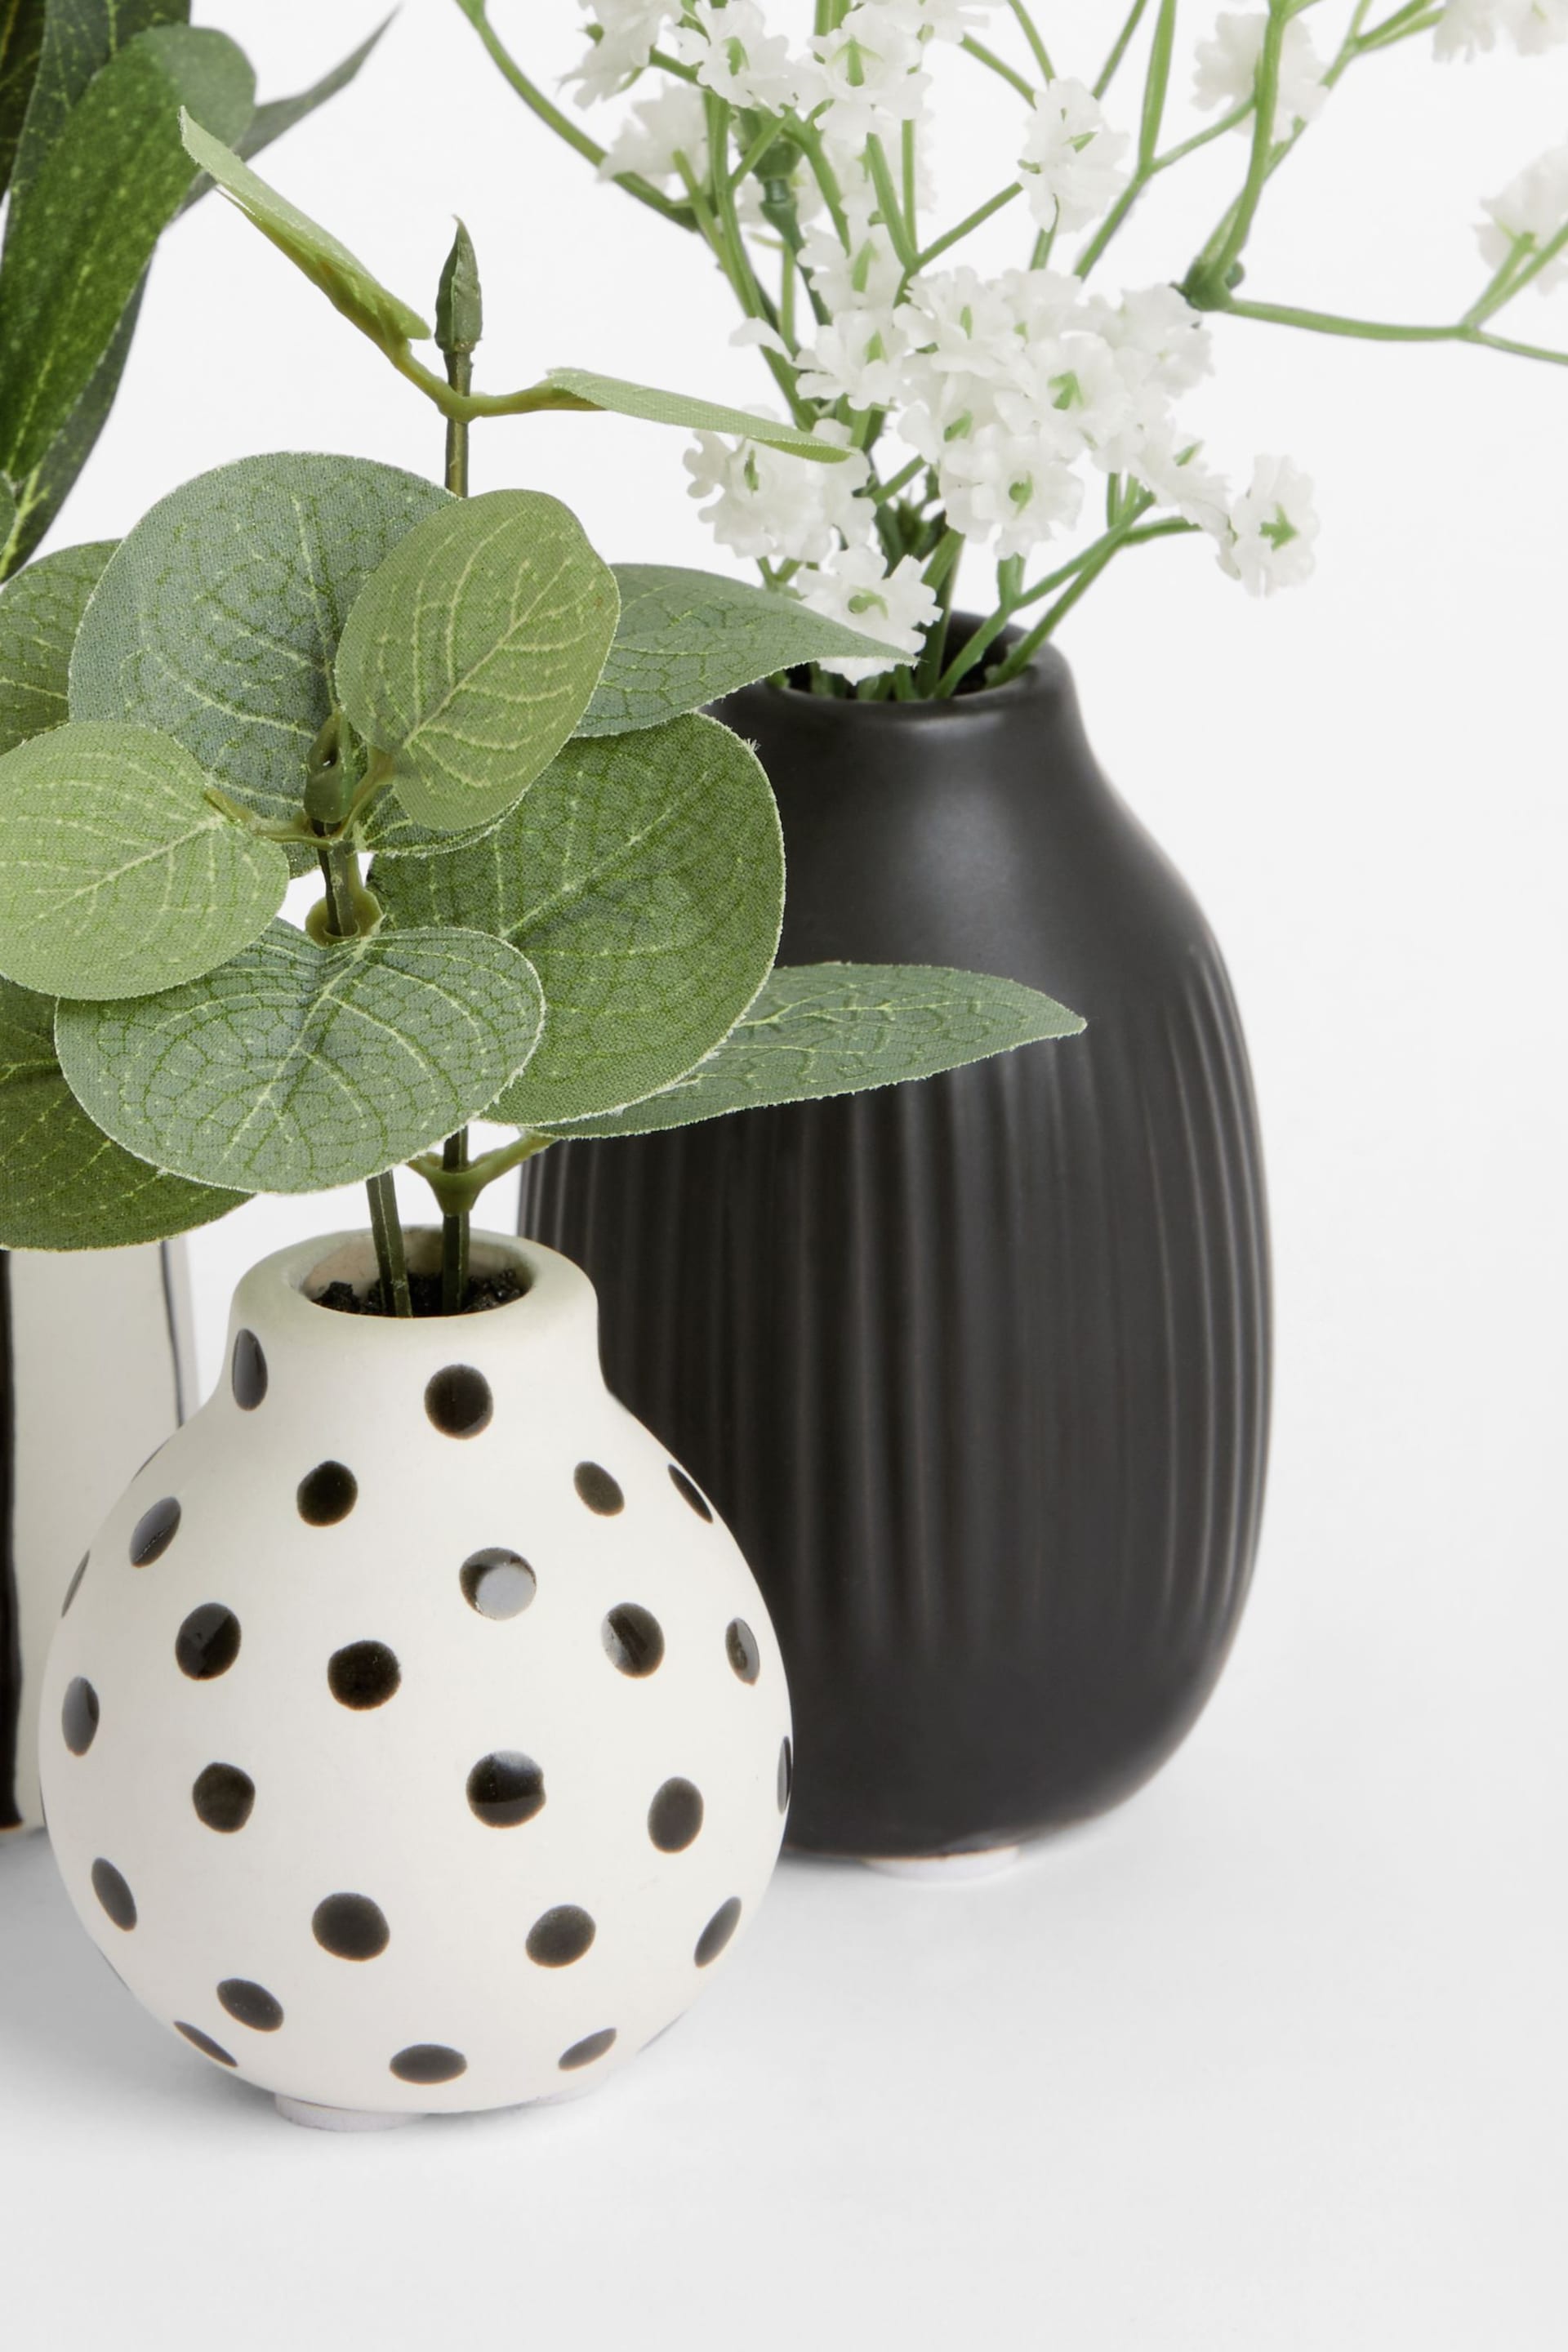 Set of 3 Green Artificial Plants In Monochrome Ceramic Pots - Image 3 of 3